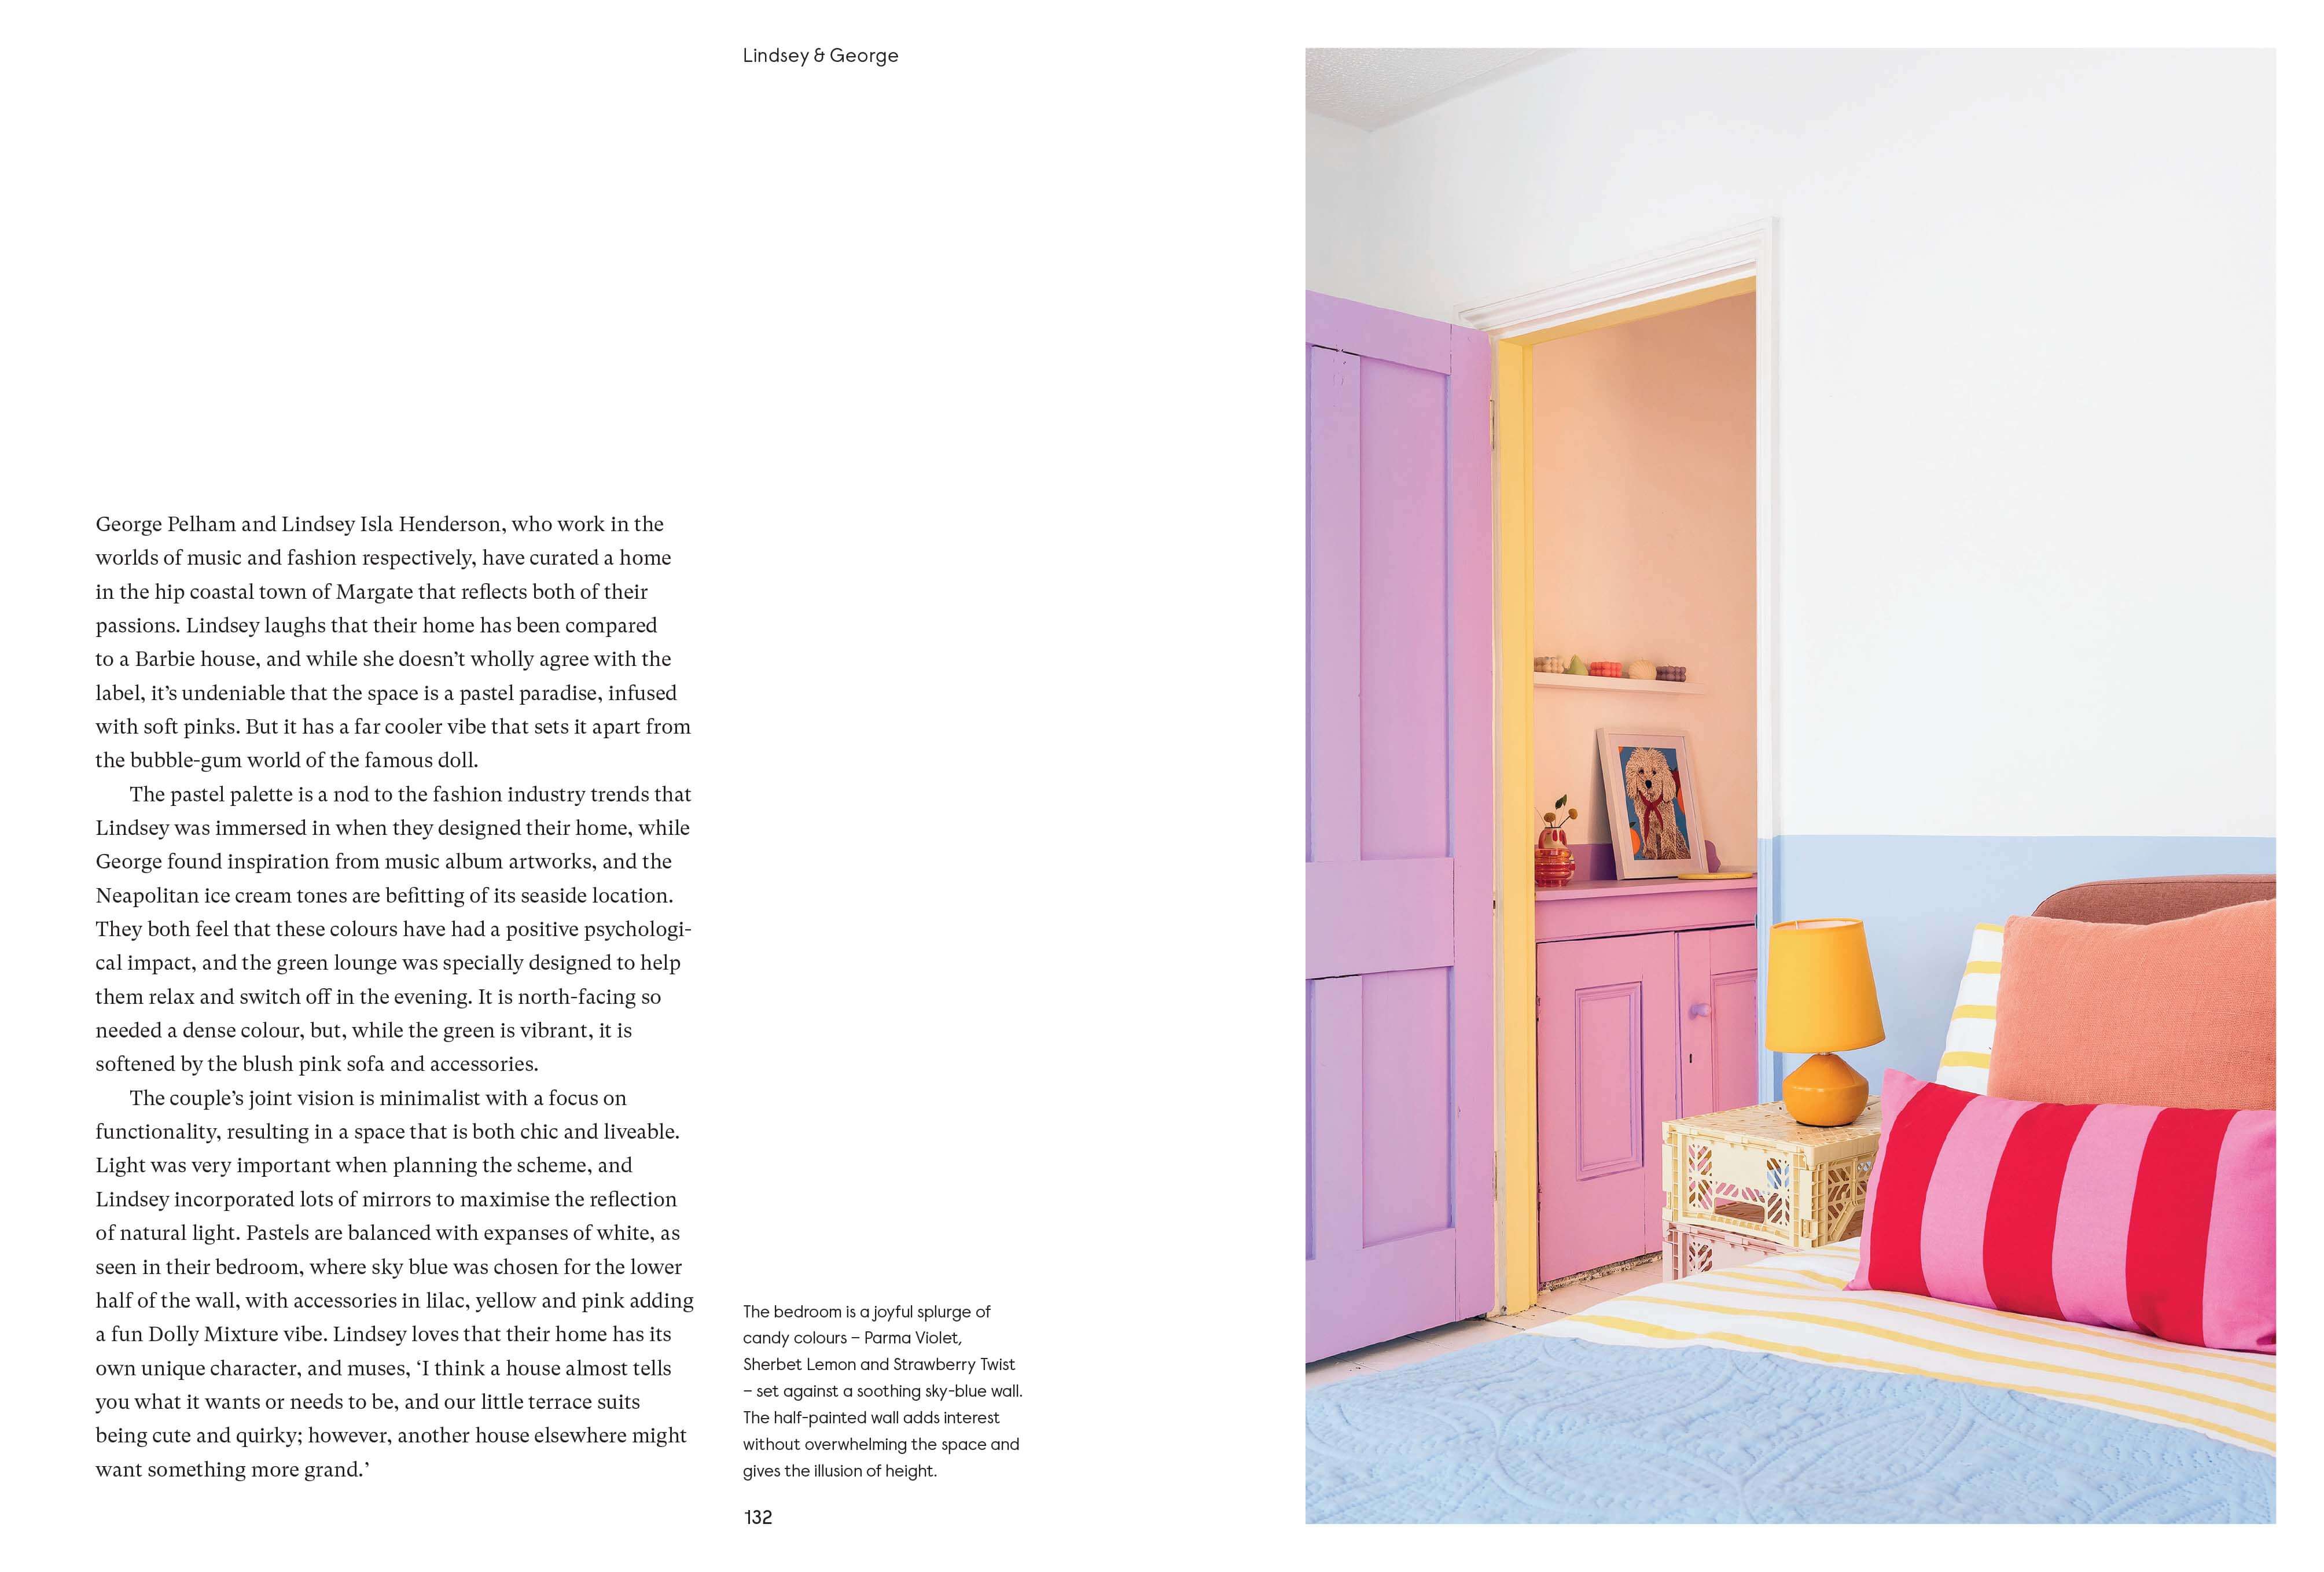 New Colourful Home | Interiors Book - Lifestory